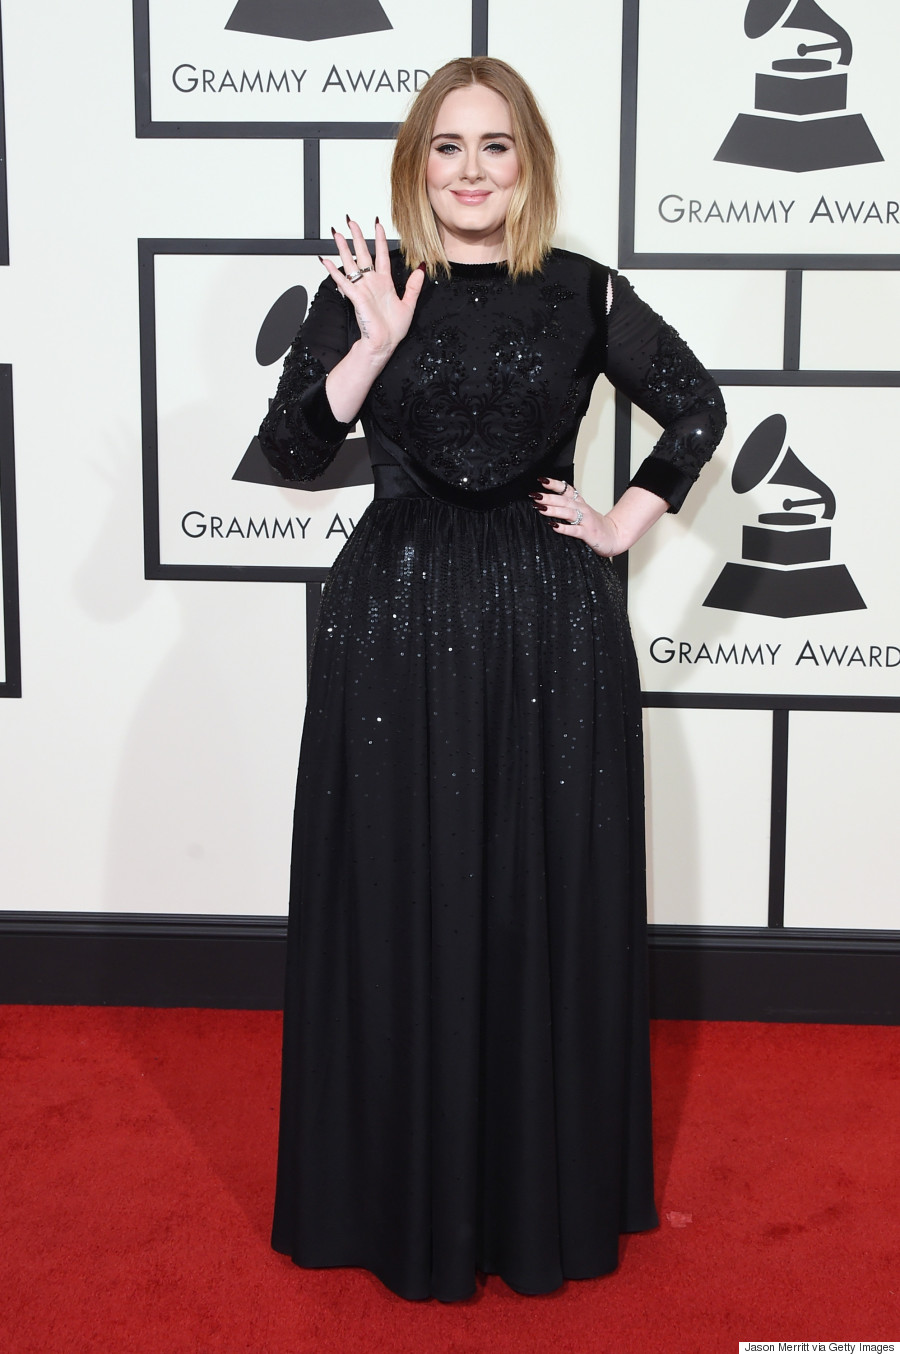 Adele Grammys 2016 Songstress Shines In Sequined Givenchy On Red